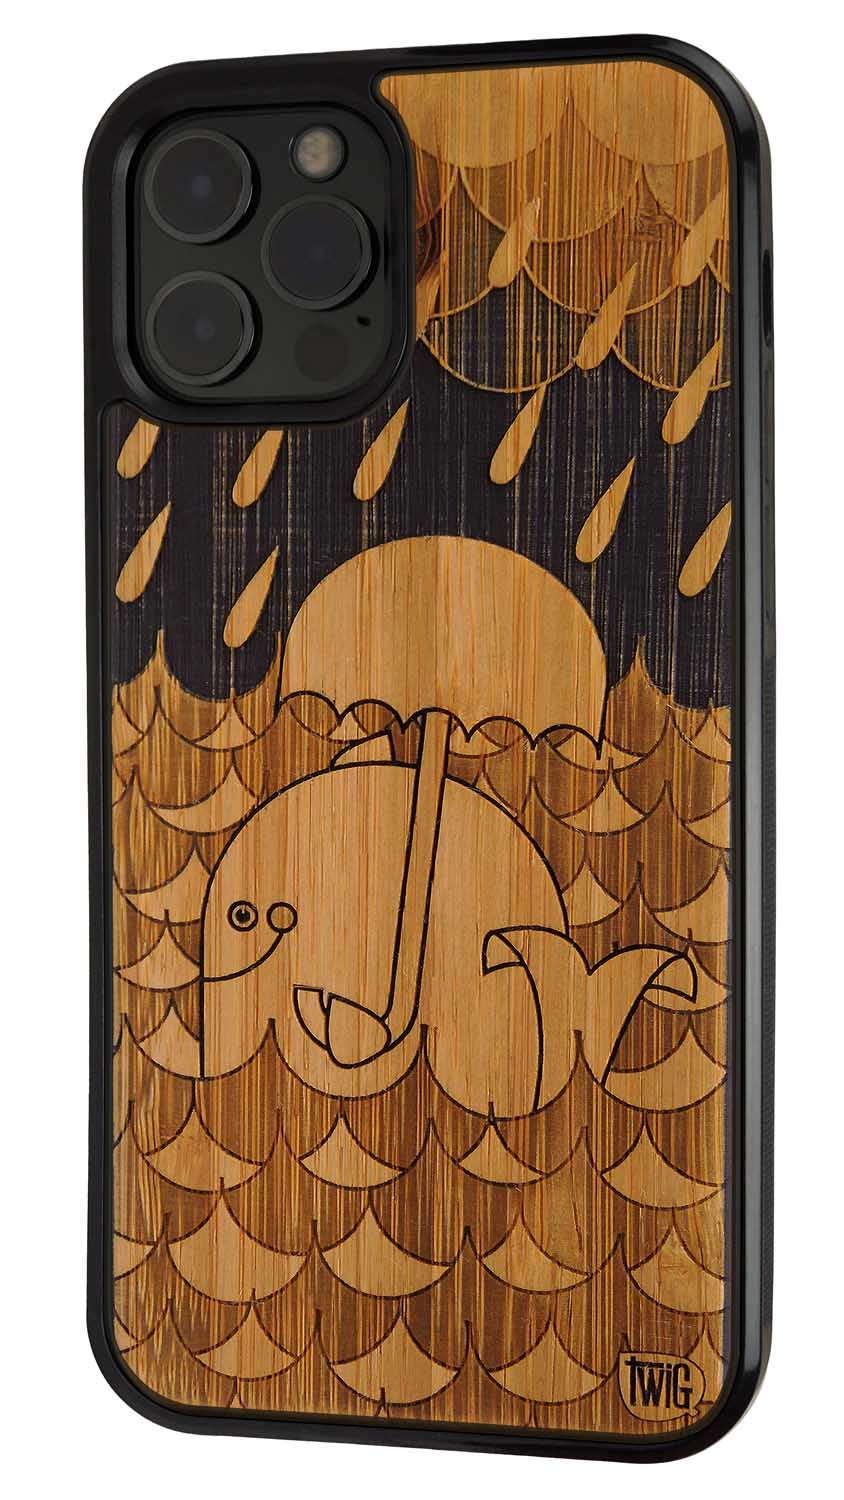 Rainy Day Whale - Bamboo iPhone Case, iPhone Case - Twig Case Co.